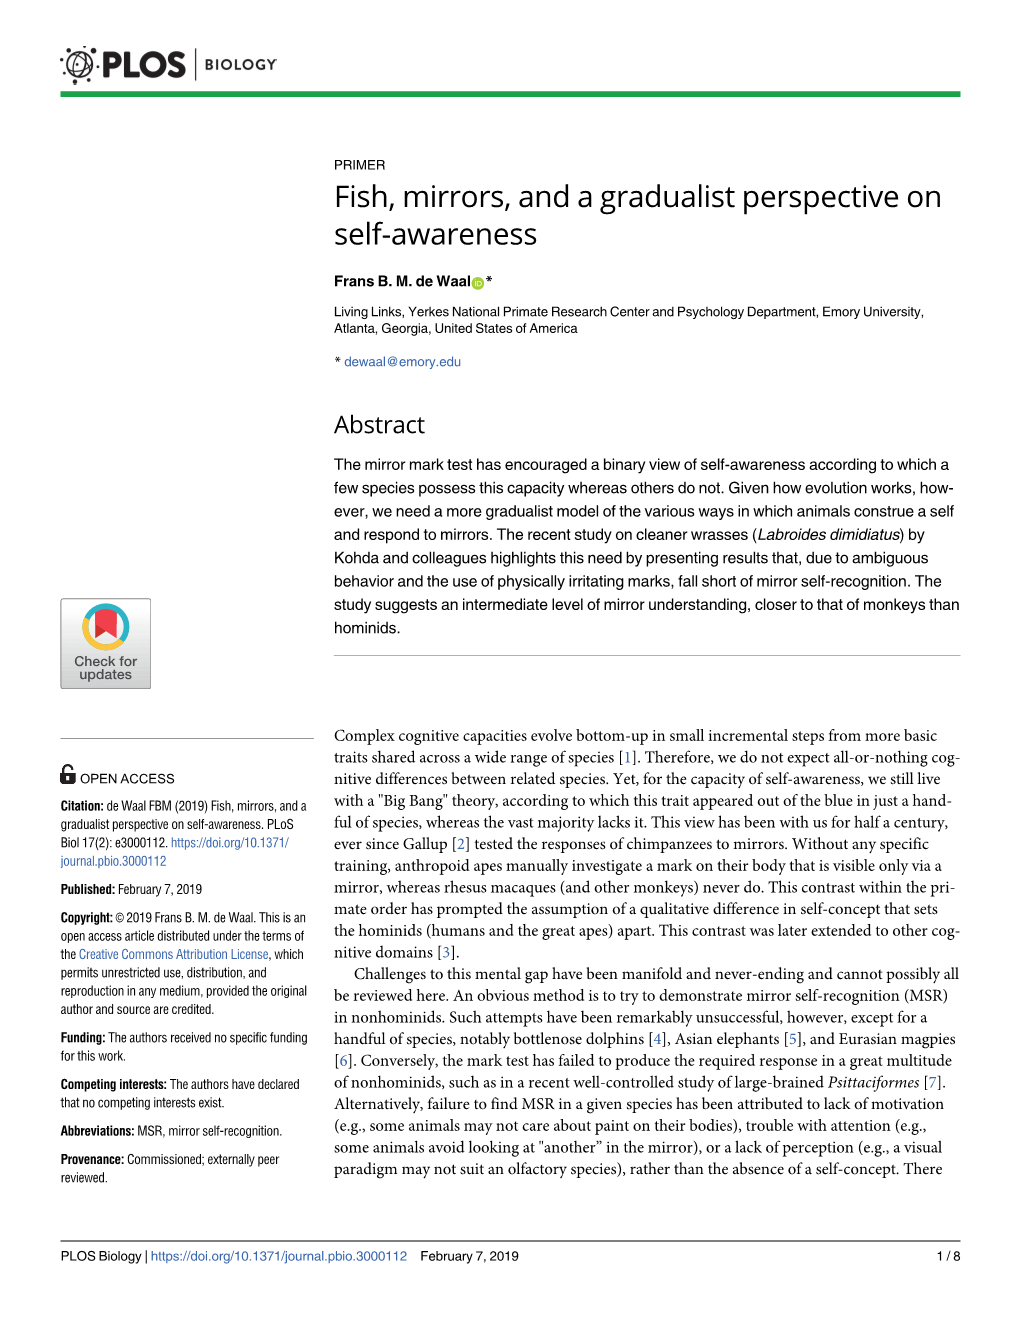 Fish, Mirrors, and a Gradualist Perspective on Self-Awareness